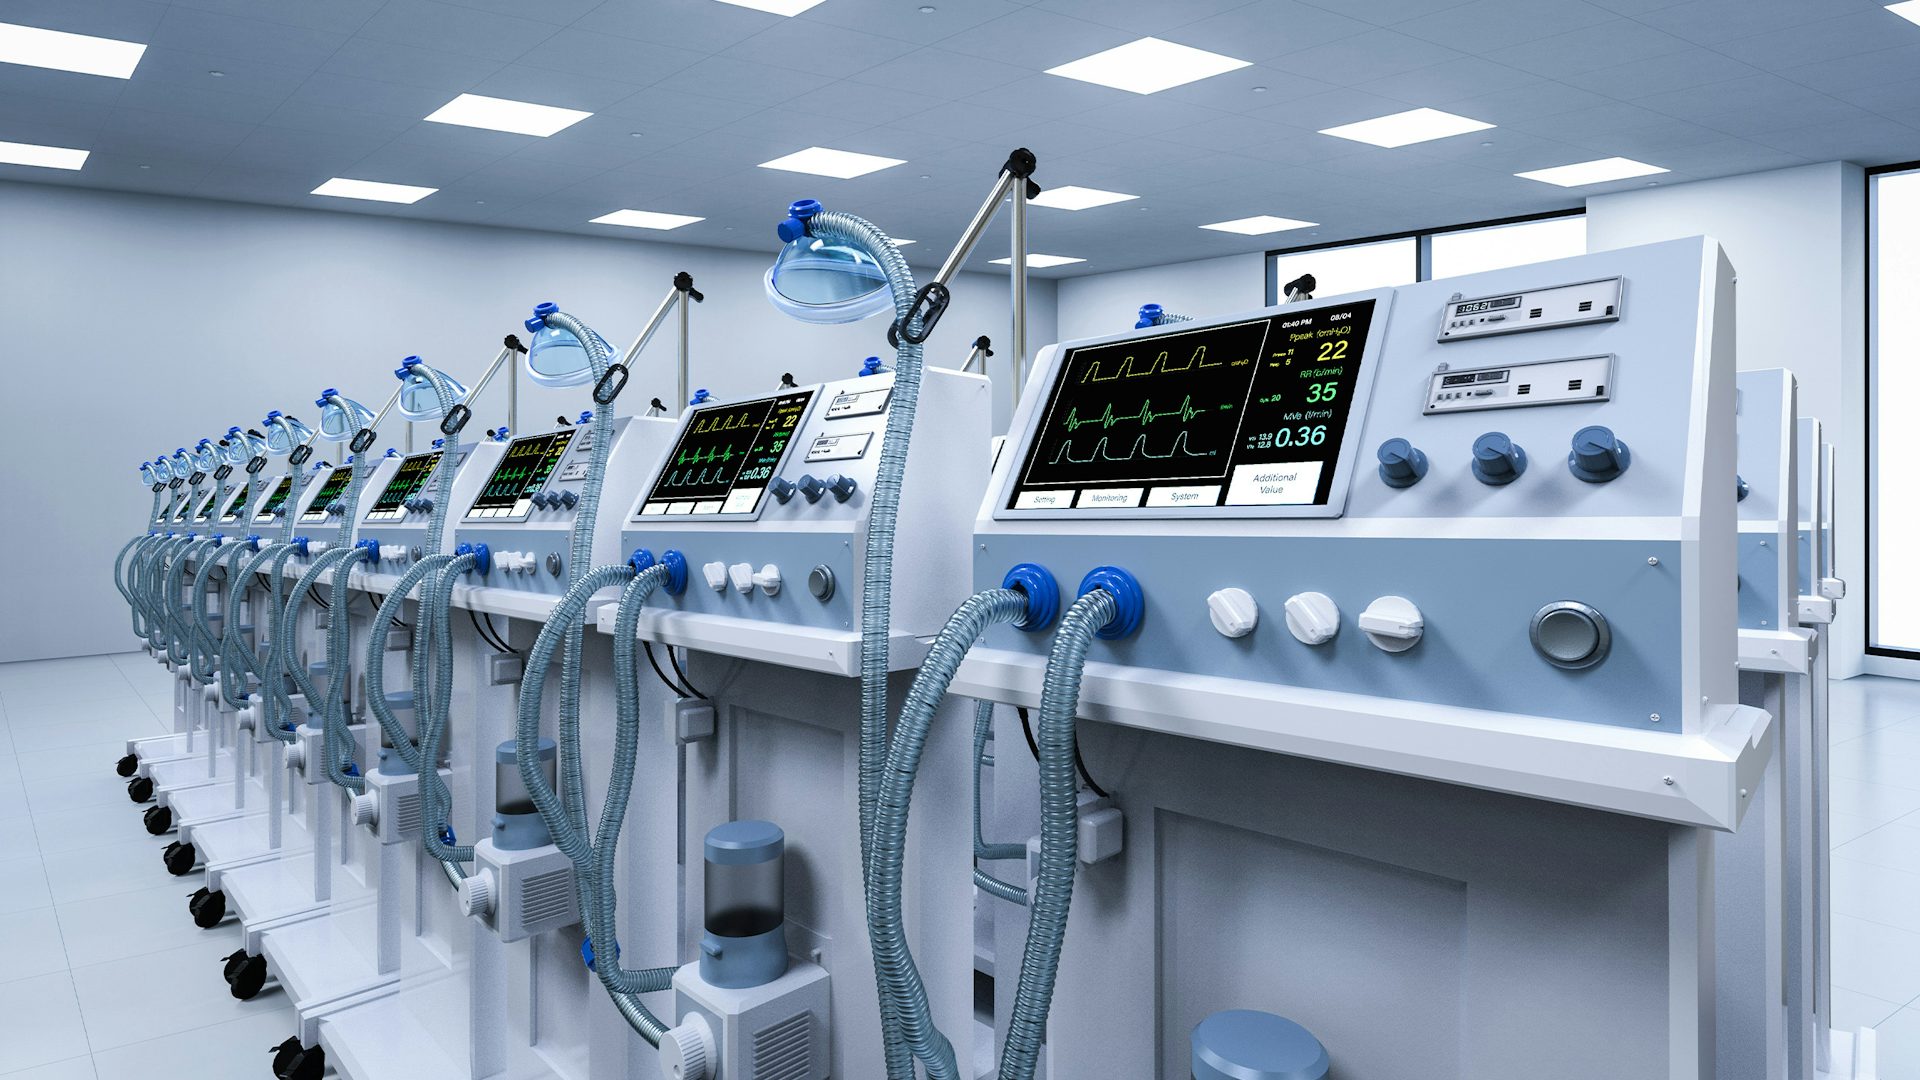 Group of ventilator machines in a medical device manufacturing facility.
